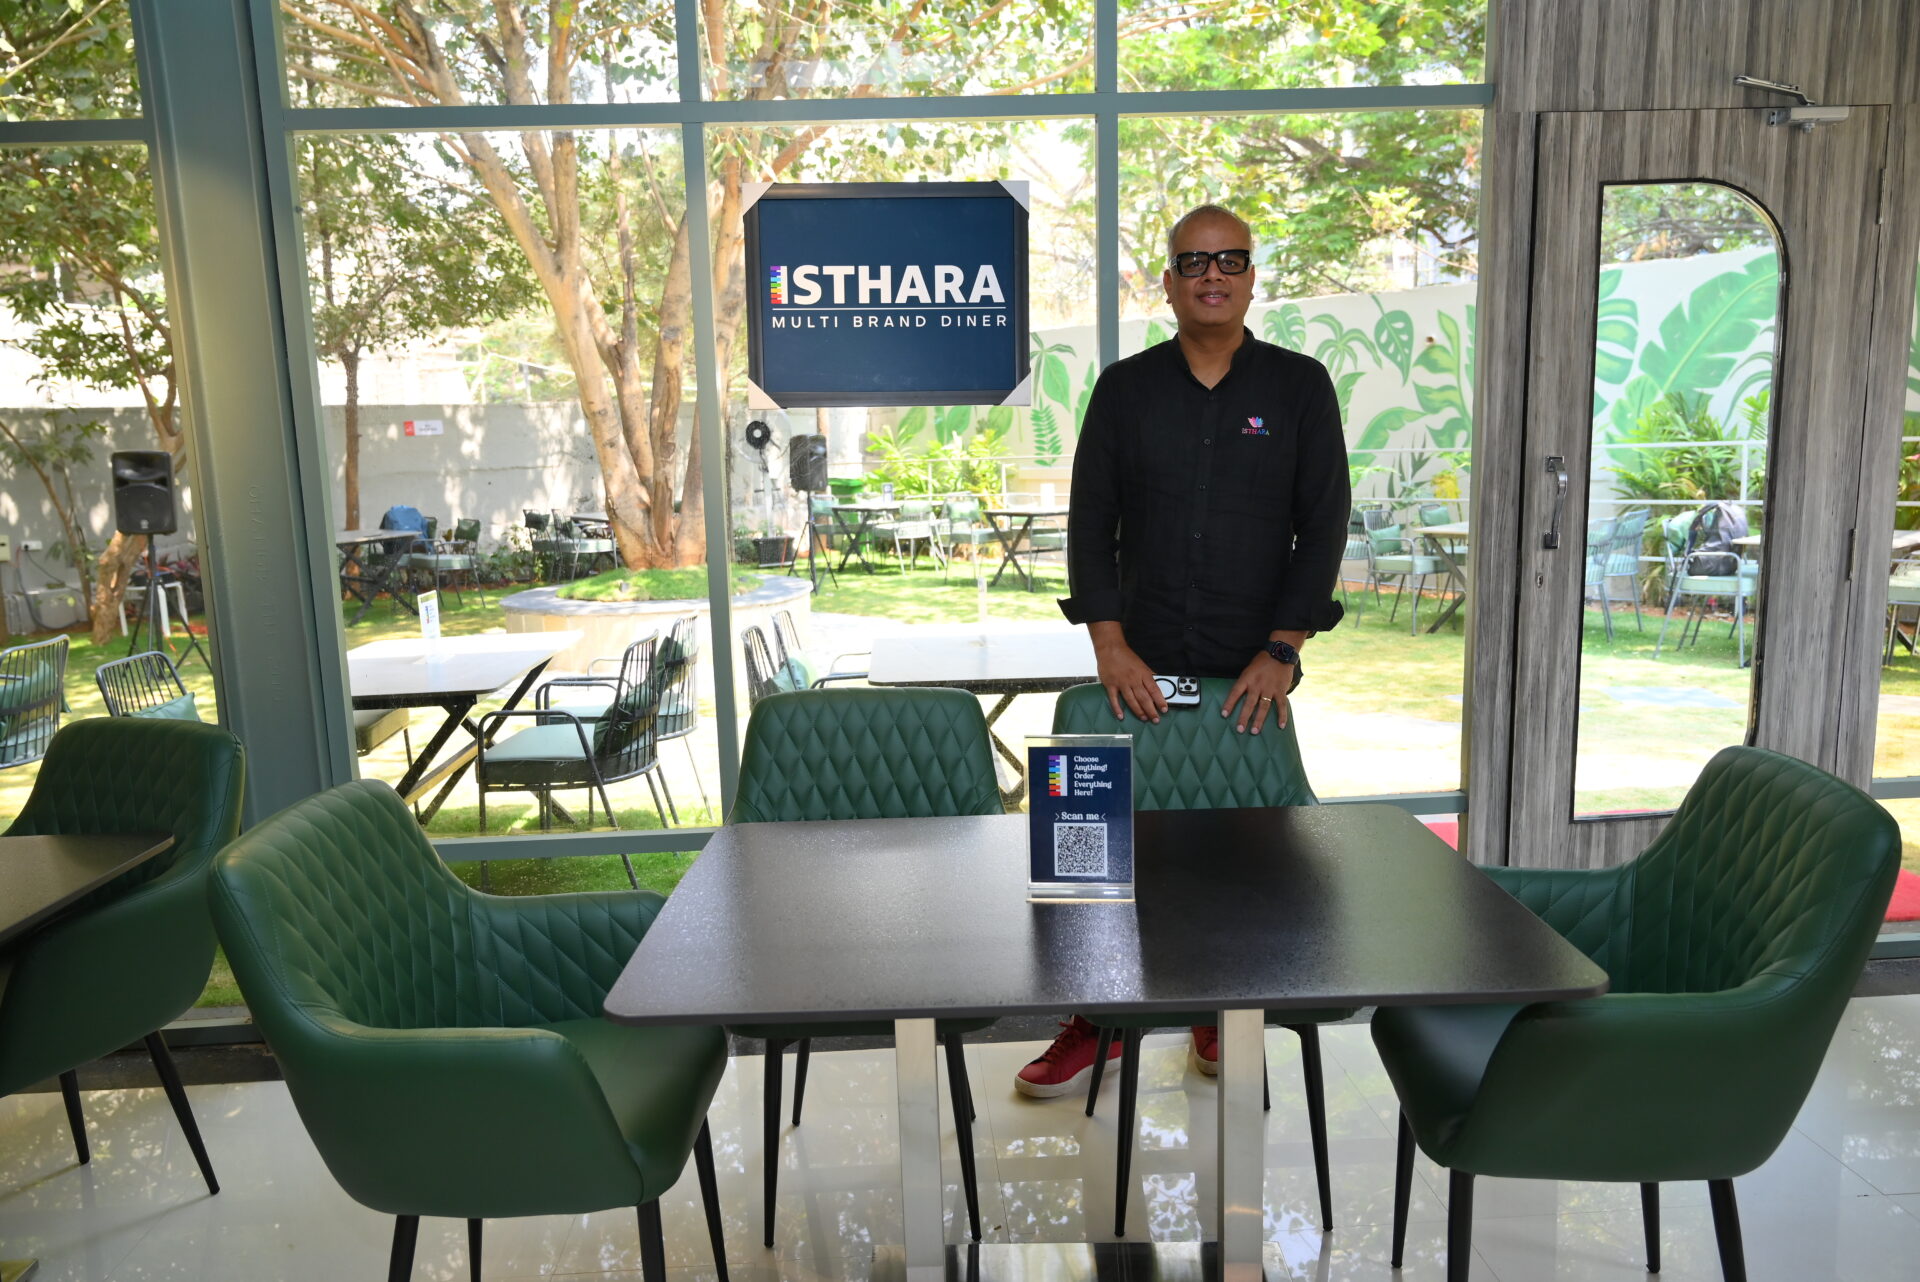 Isthara ventures into Gujarat as part of its nationwide expansion